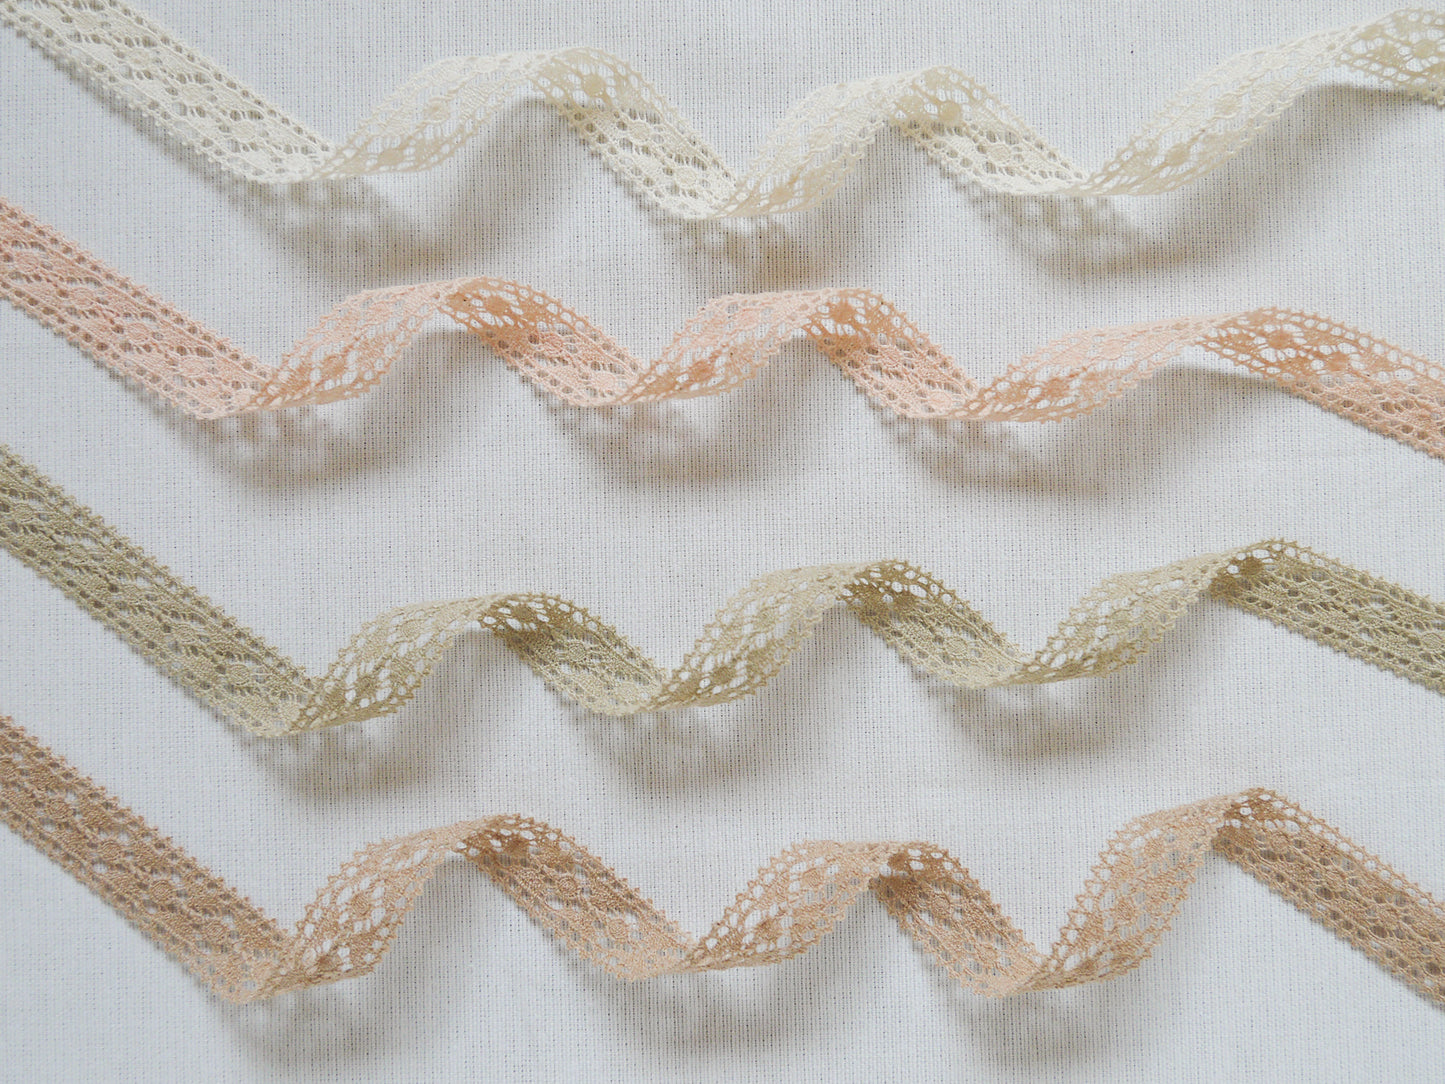 16mm lace ribbon in 100% organic cotton